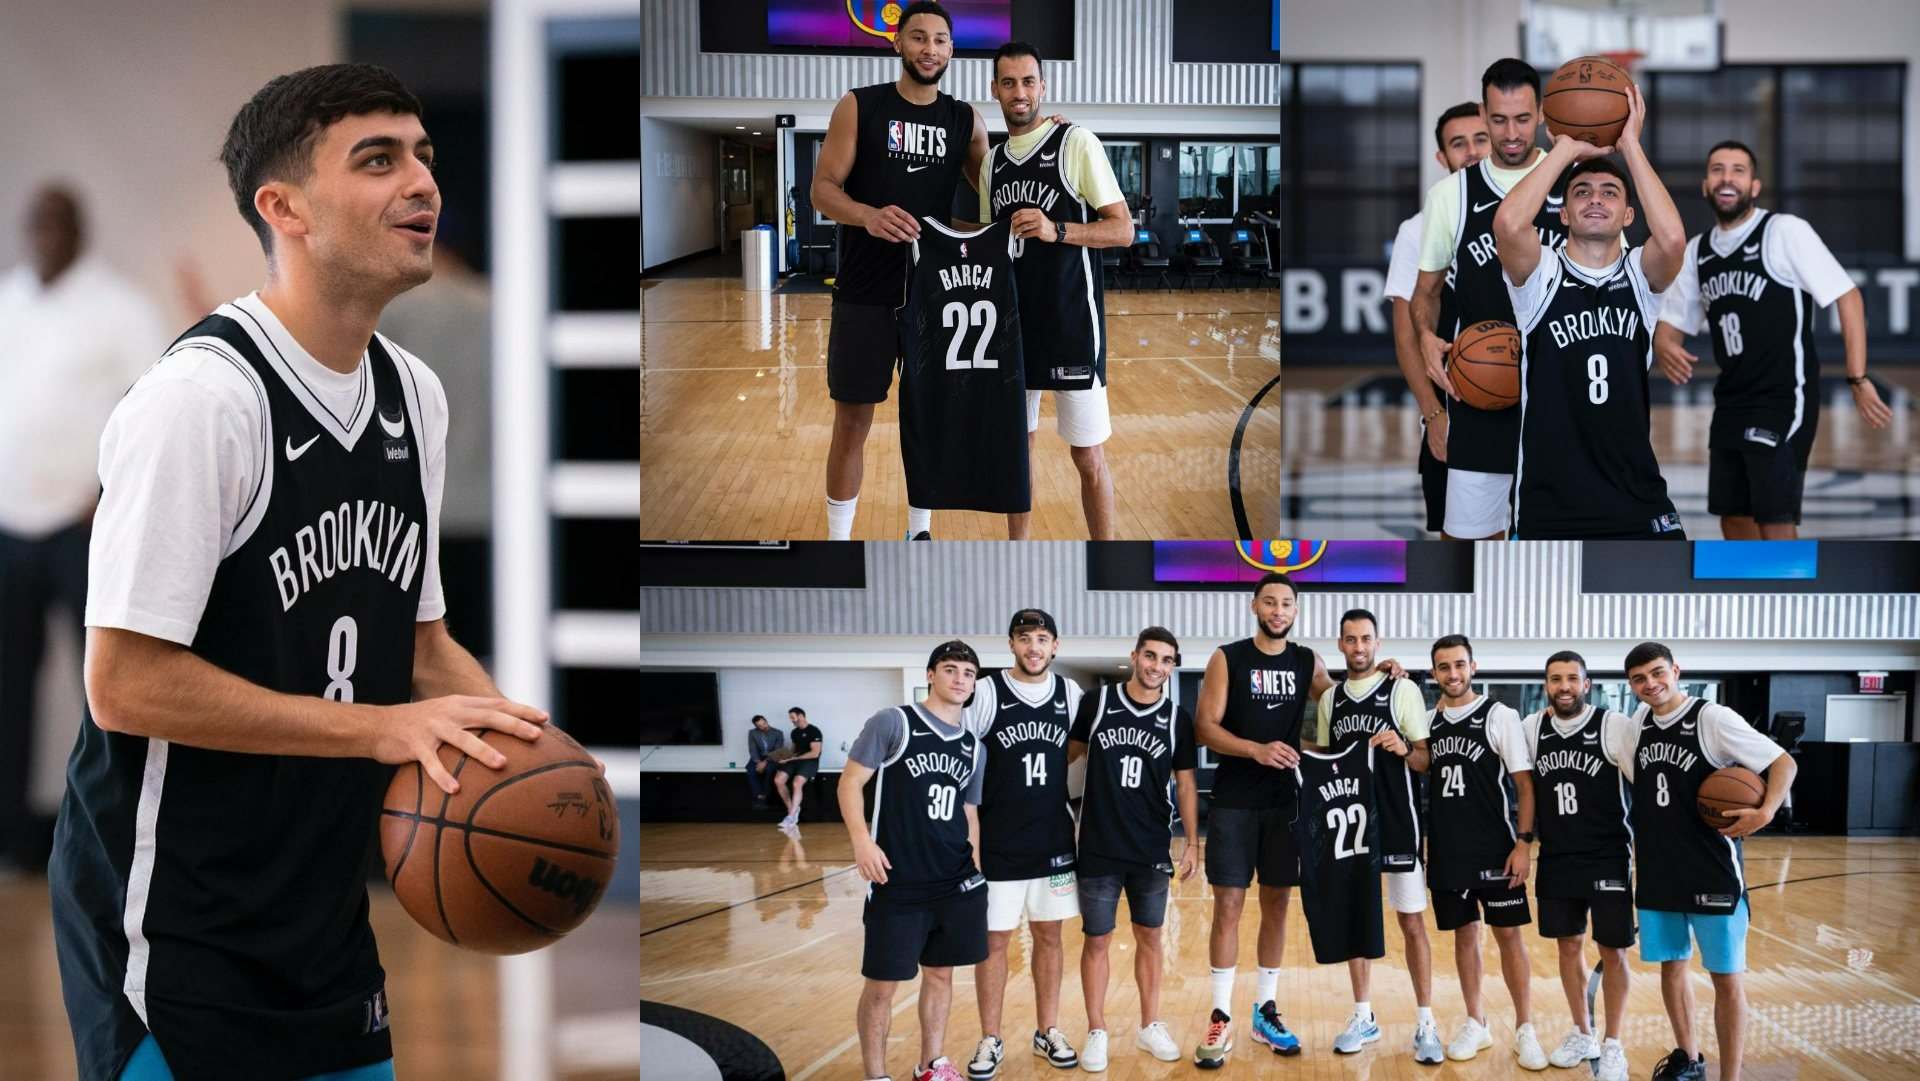 Barcelona team up with Brooklyn Nets in New York [Photos]